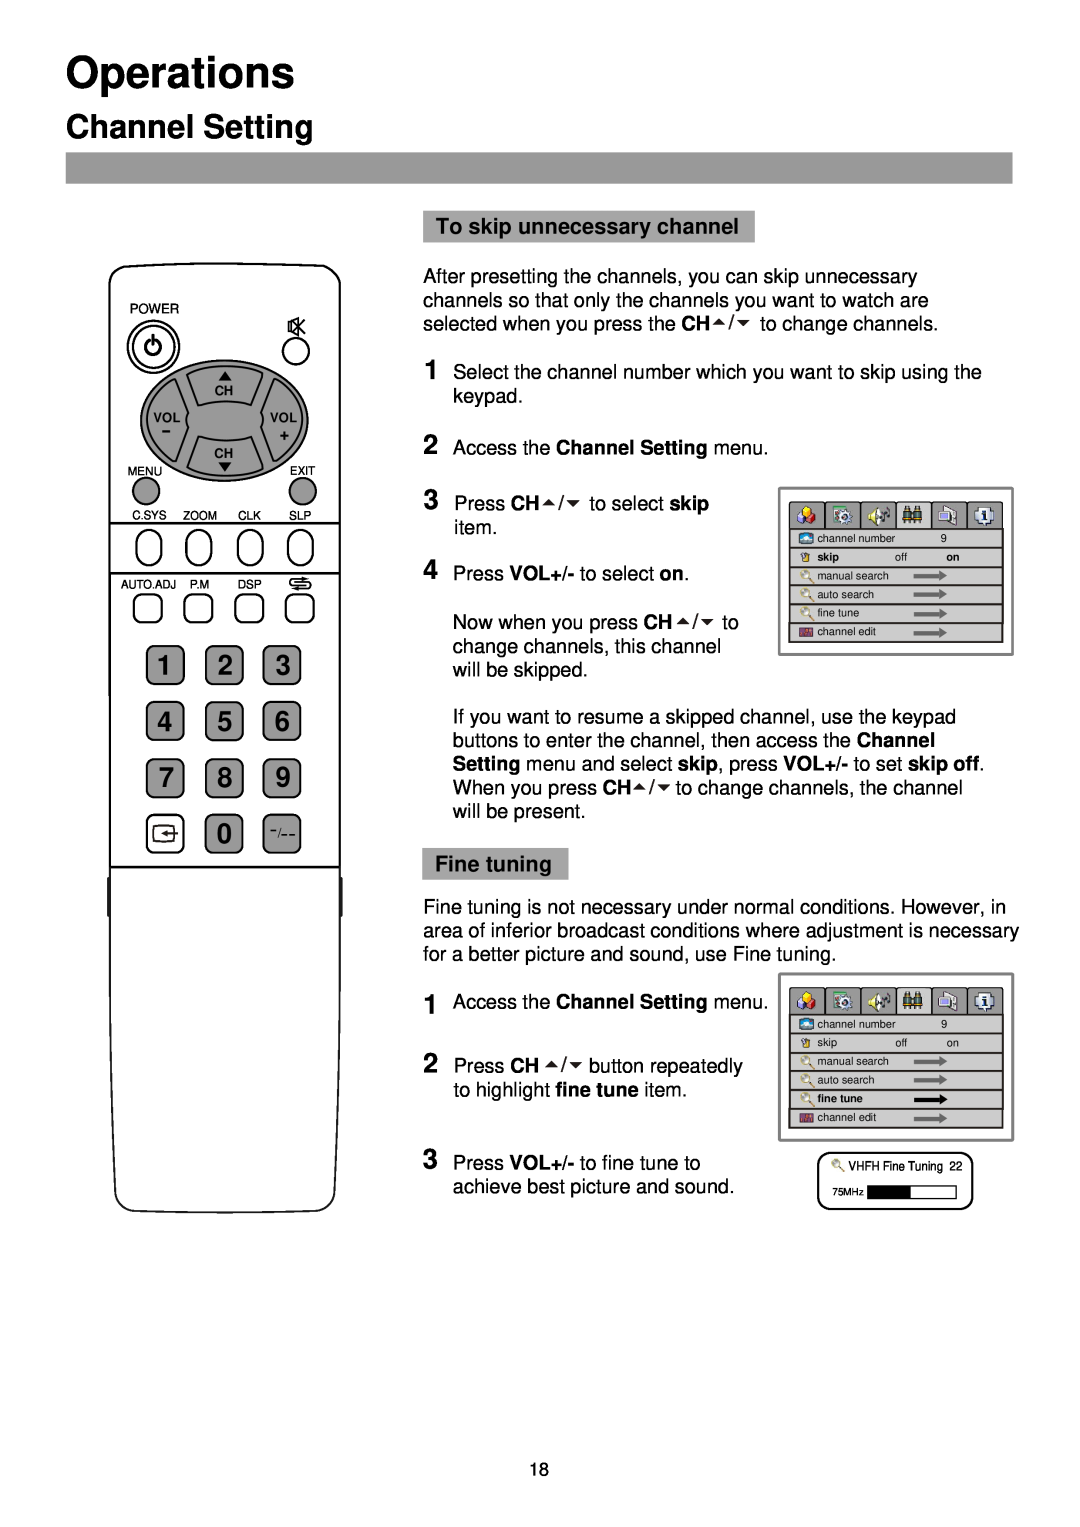 Palsonic TFTV515 owner manual 4 5 7 8, Operations, Channel Setting, To skip unnecessary channel, Fine tuning 